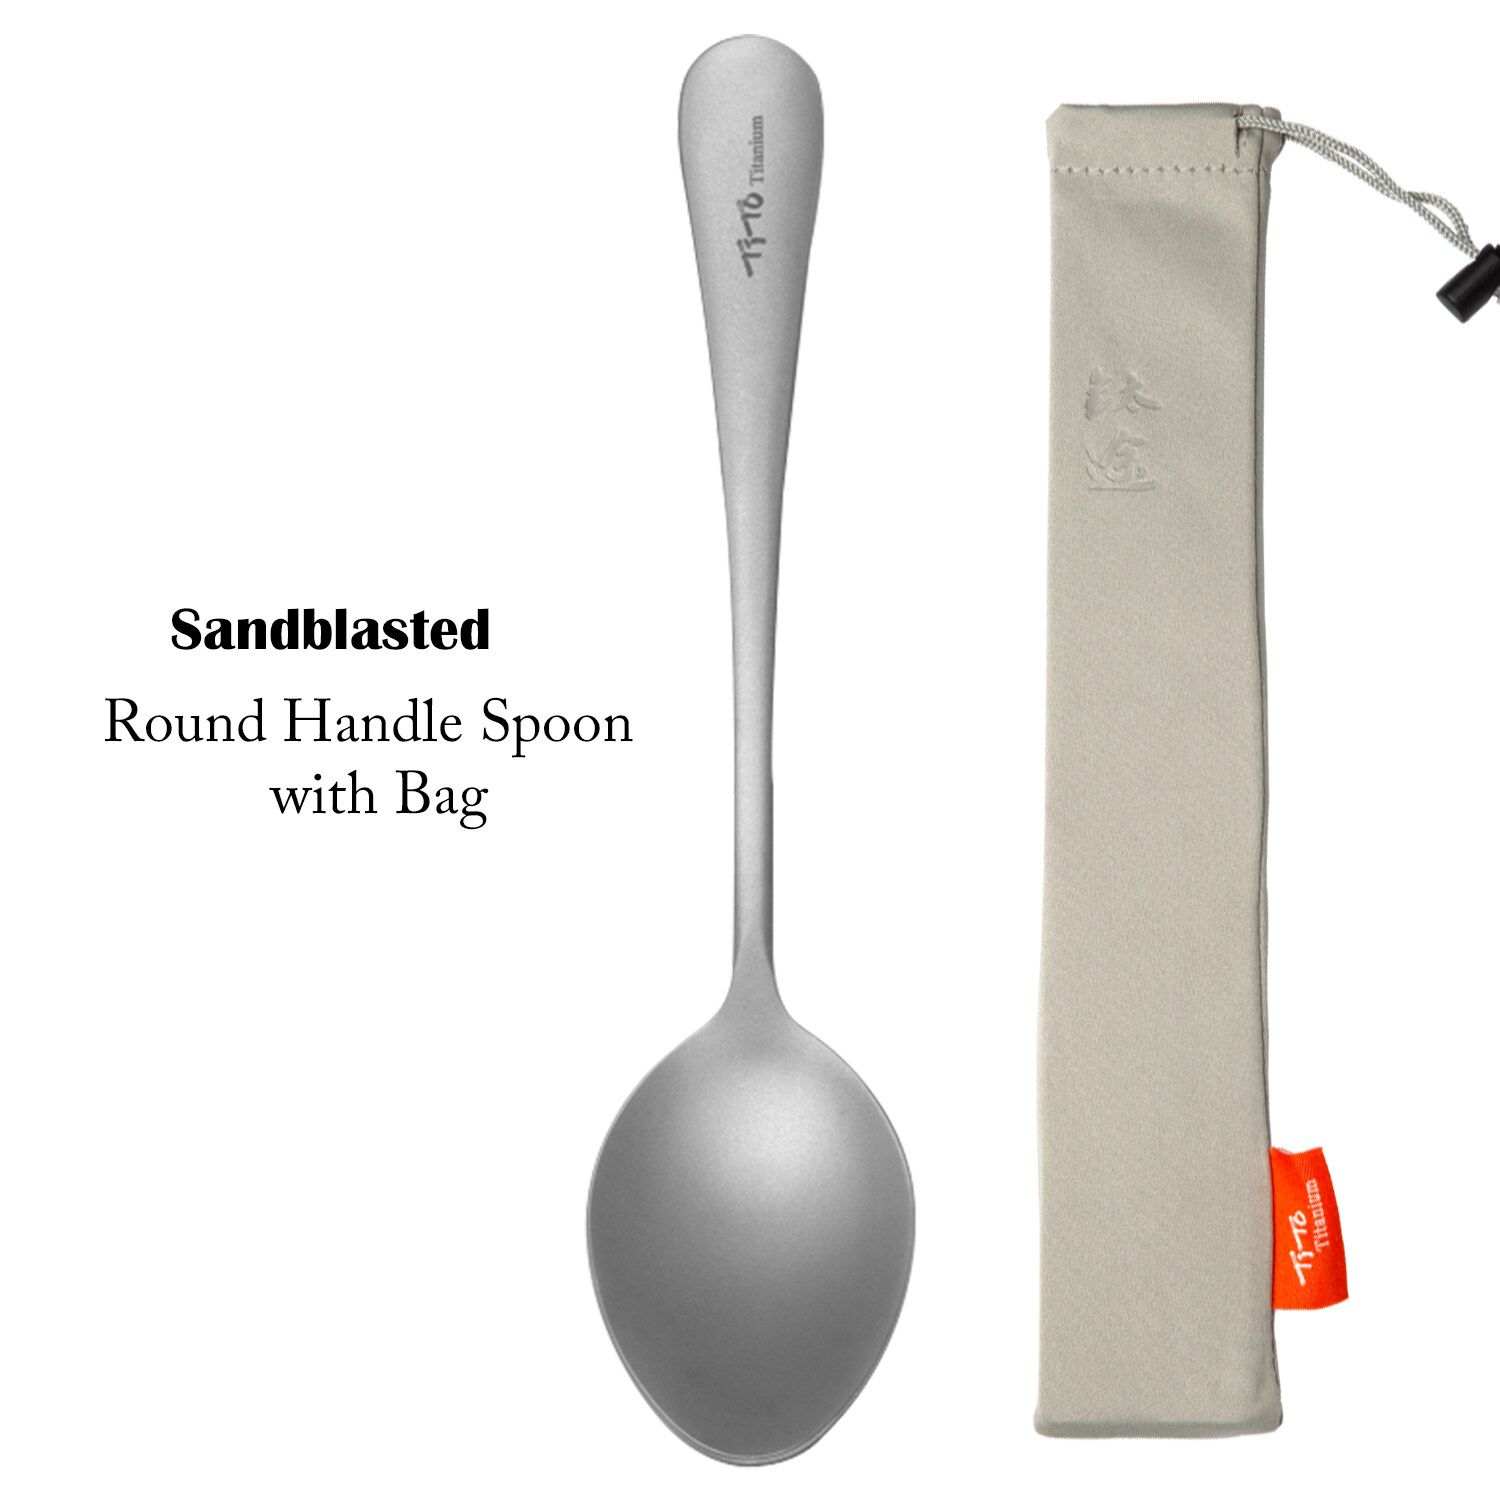 Spoon with round handle